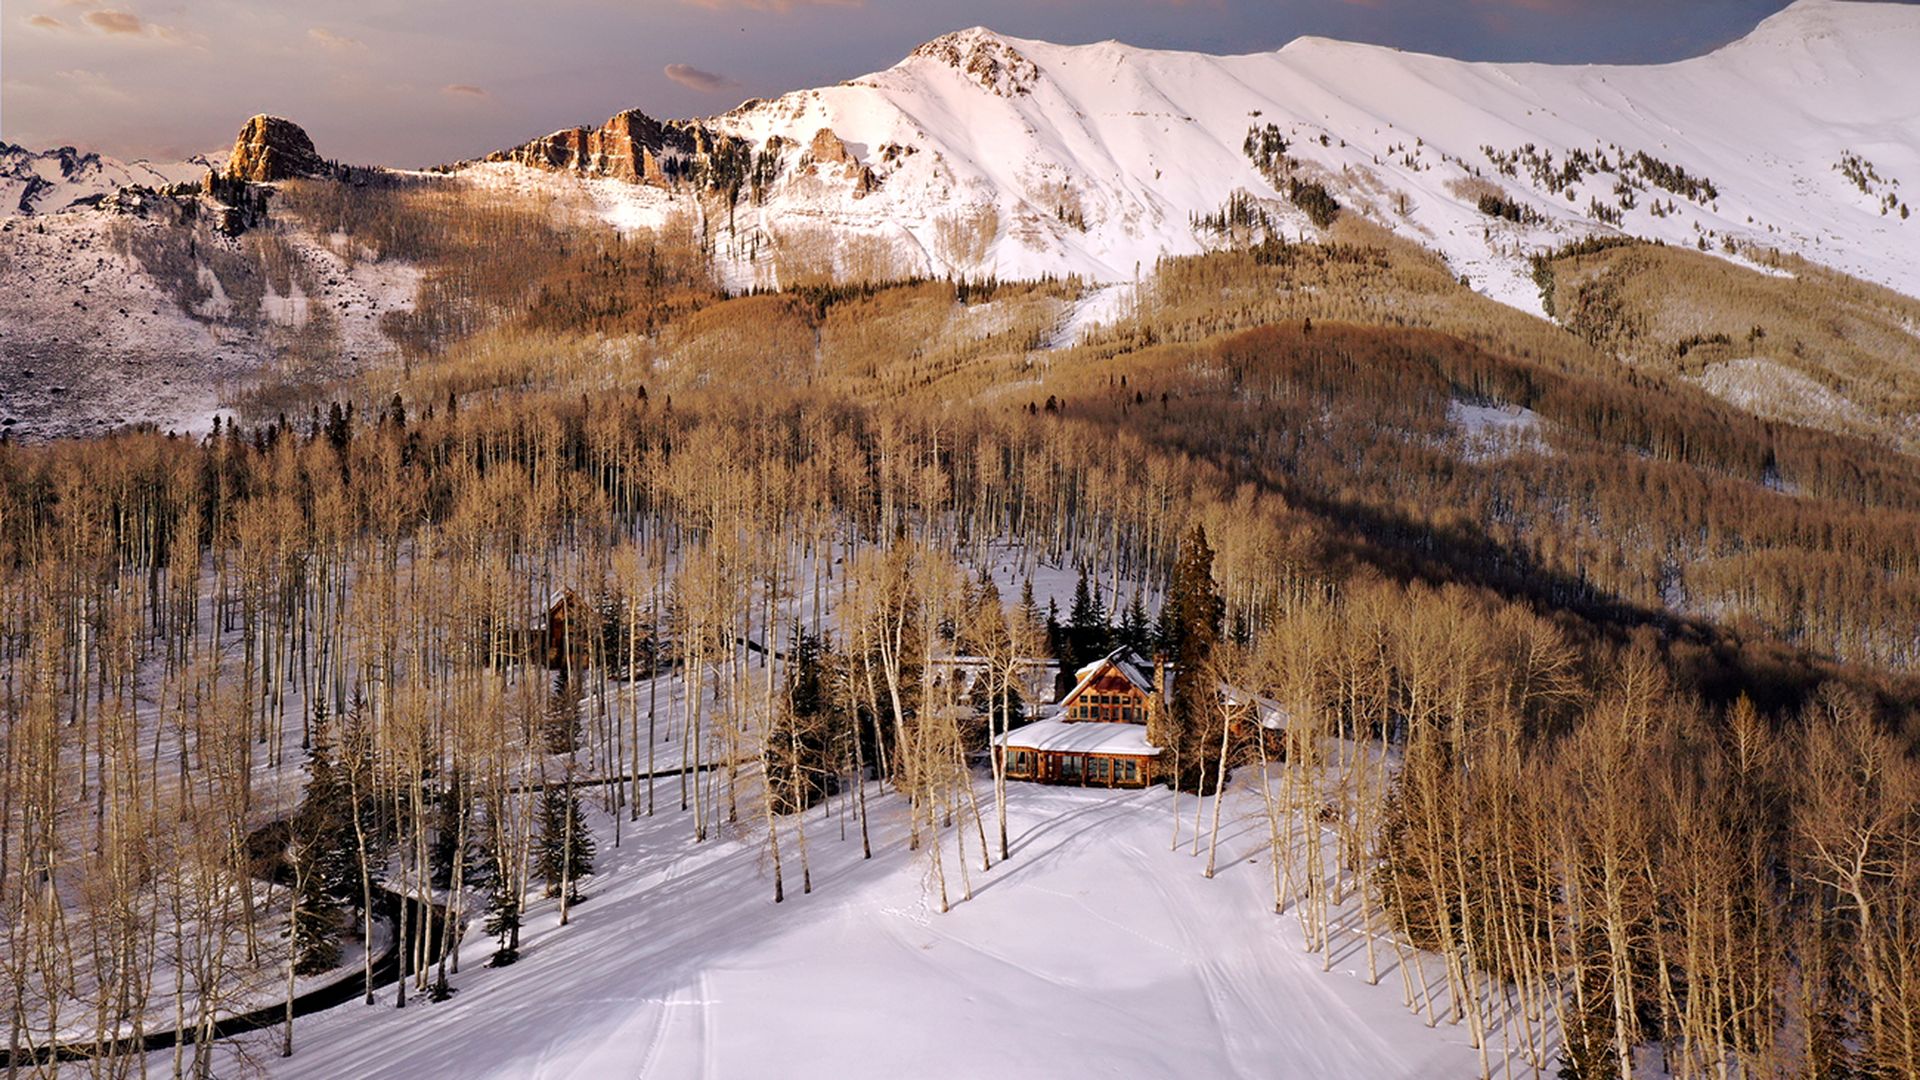 tom cruise's telluride ranch is on the market for $39.5M